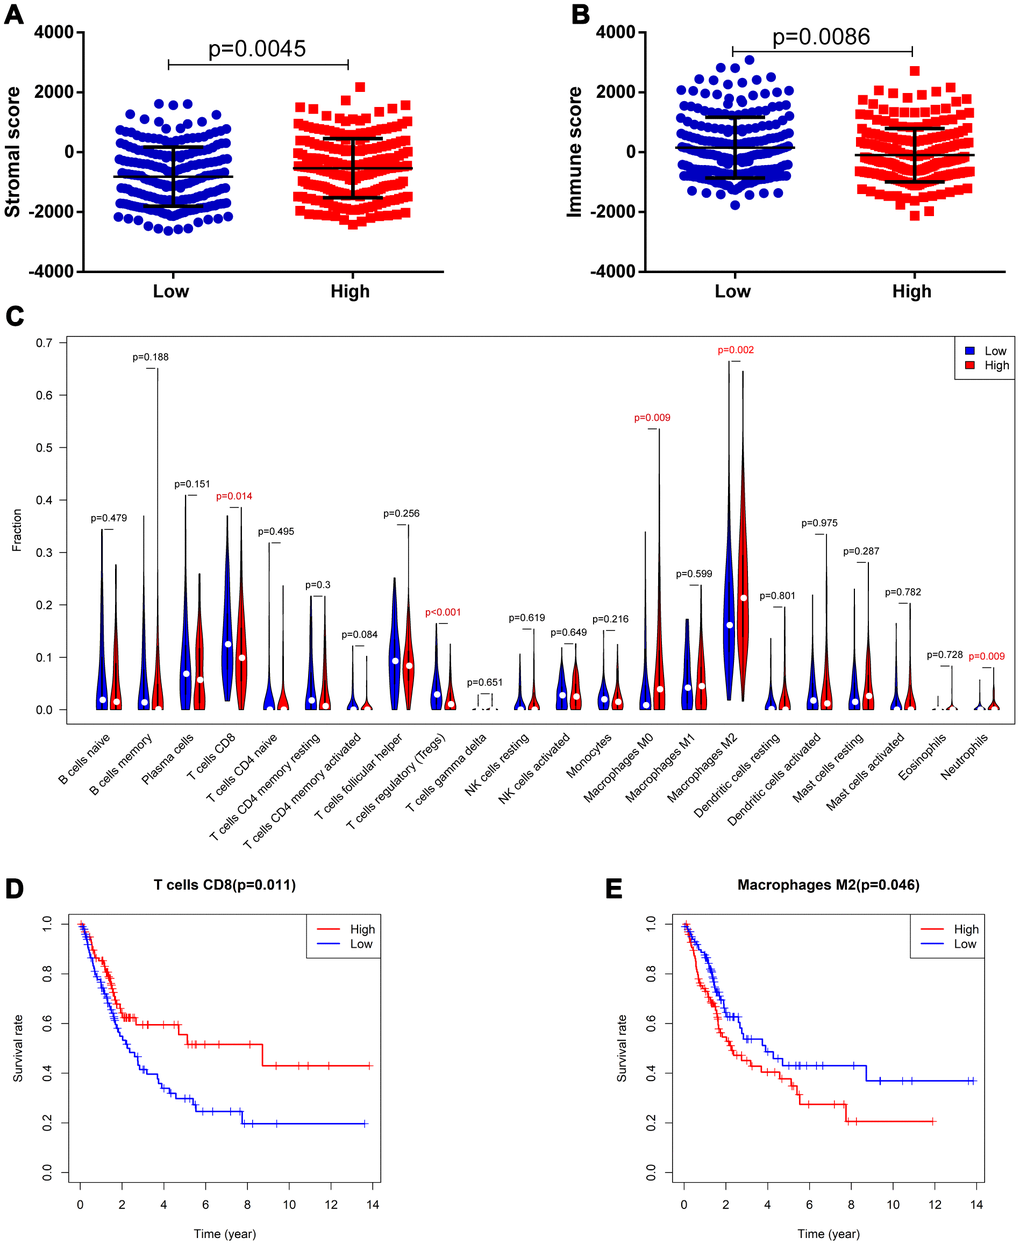 Correlation of the 8-IRlncRNA signature with immune cell infiltration. (A) The stromal score in the low- and high-risk groups. (B) The immune score in the low- and high-risk groups. (C) The difference of 22 tumor-infiltrating immune cells among risk groups as defined by the 8-IRlncRNA signature. (D, E) The survival analysis for the abundance ratios of the T cells CD8 (D) and macrophages M2 cells (E). The red line indicates a high expressing group of immune cells, and the blue line indicates a low expressing group of immune cells.